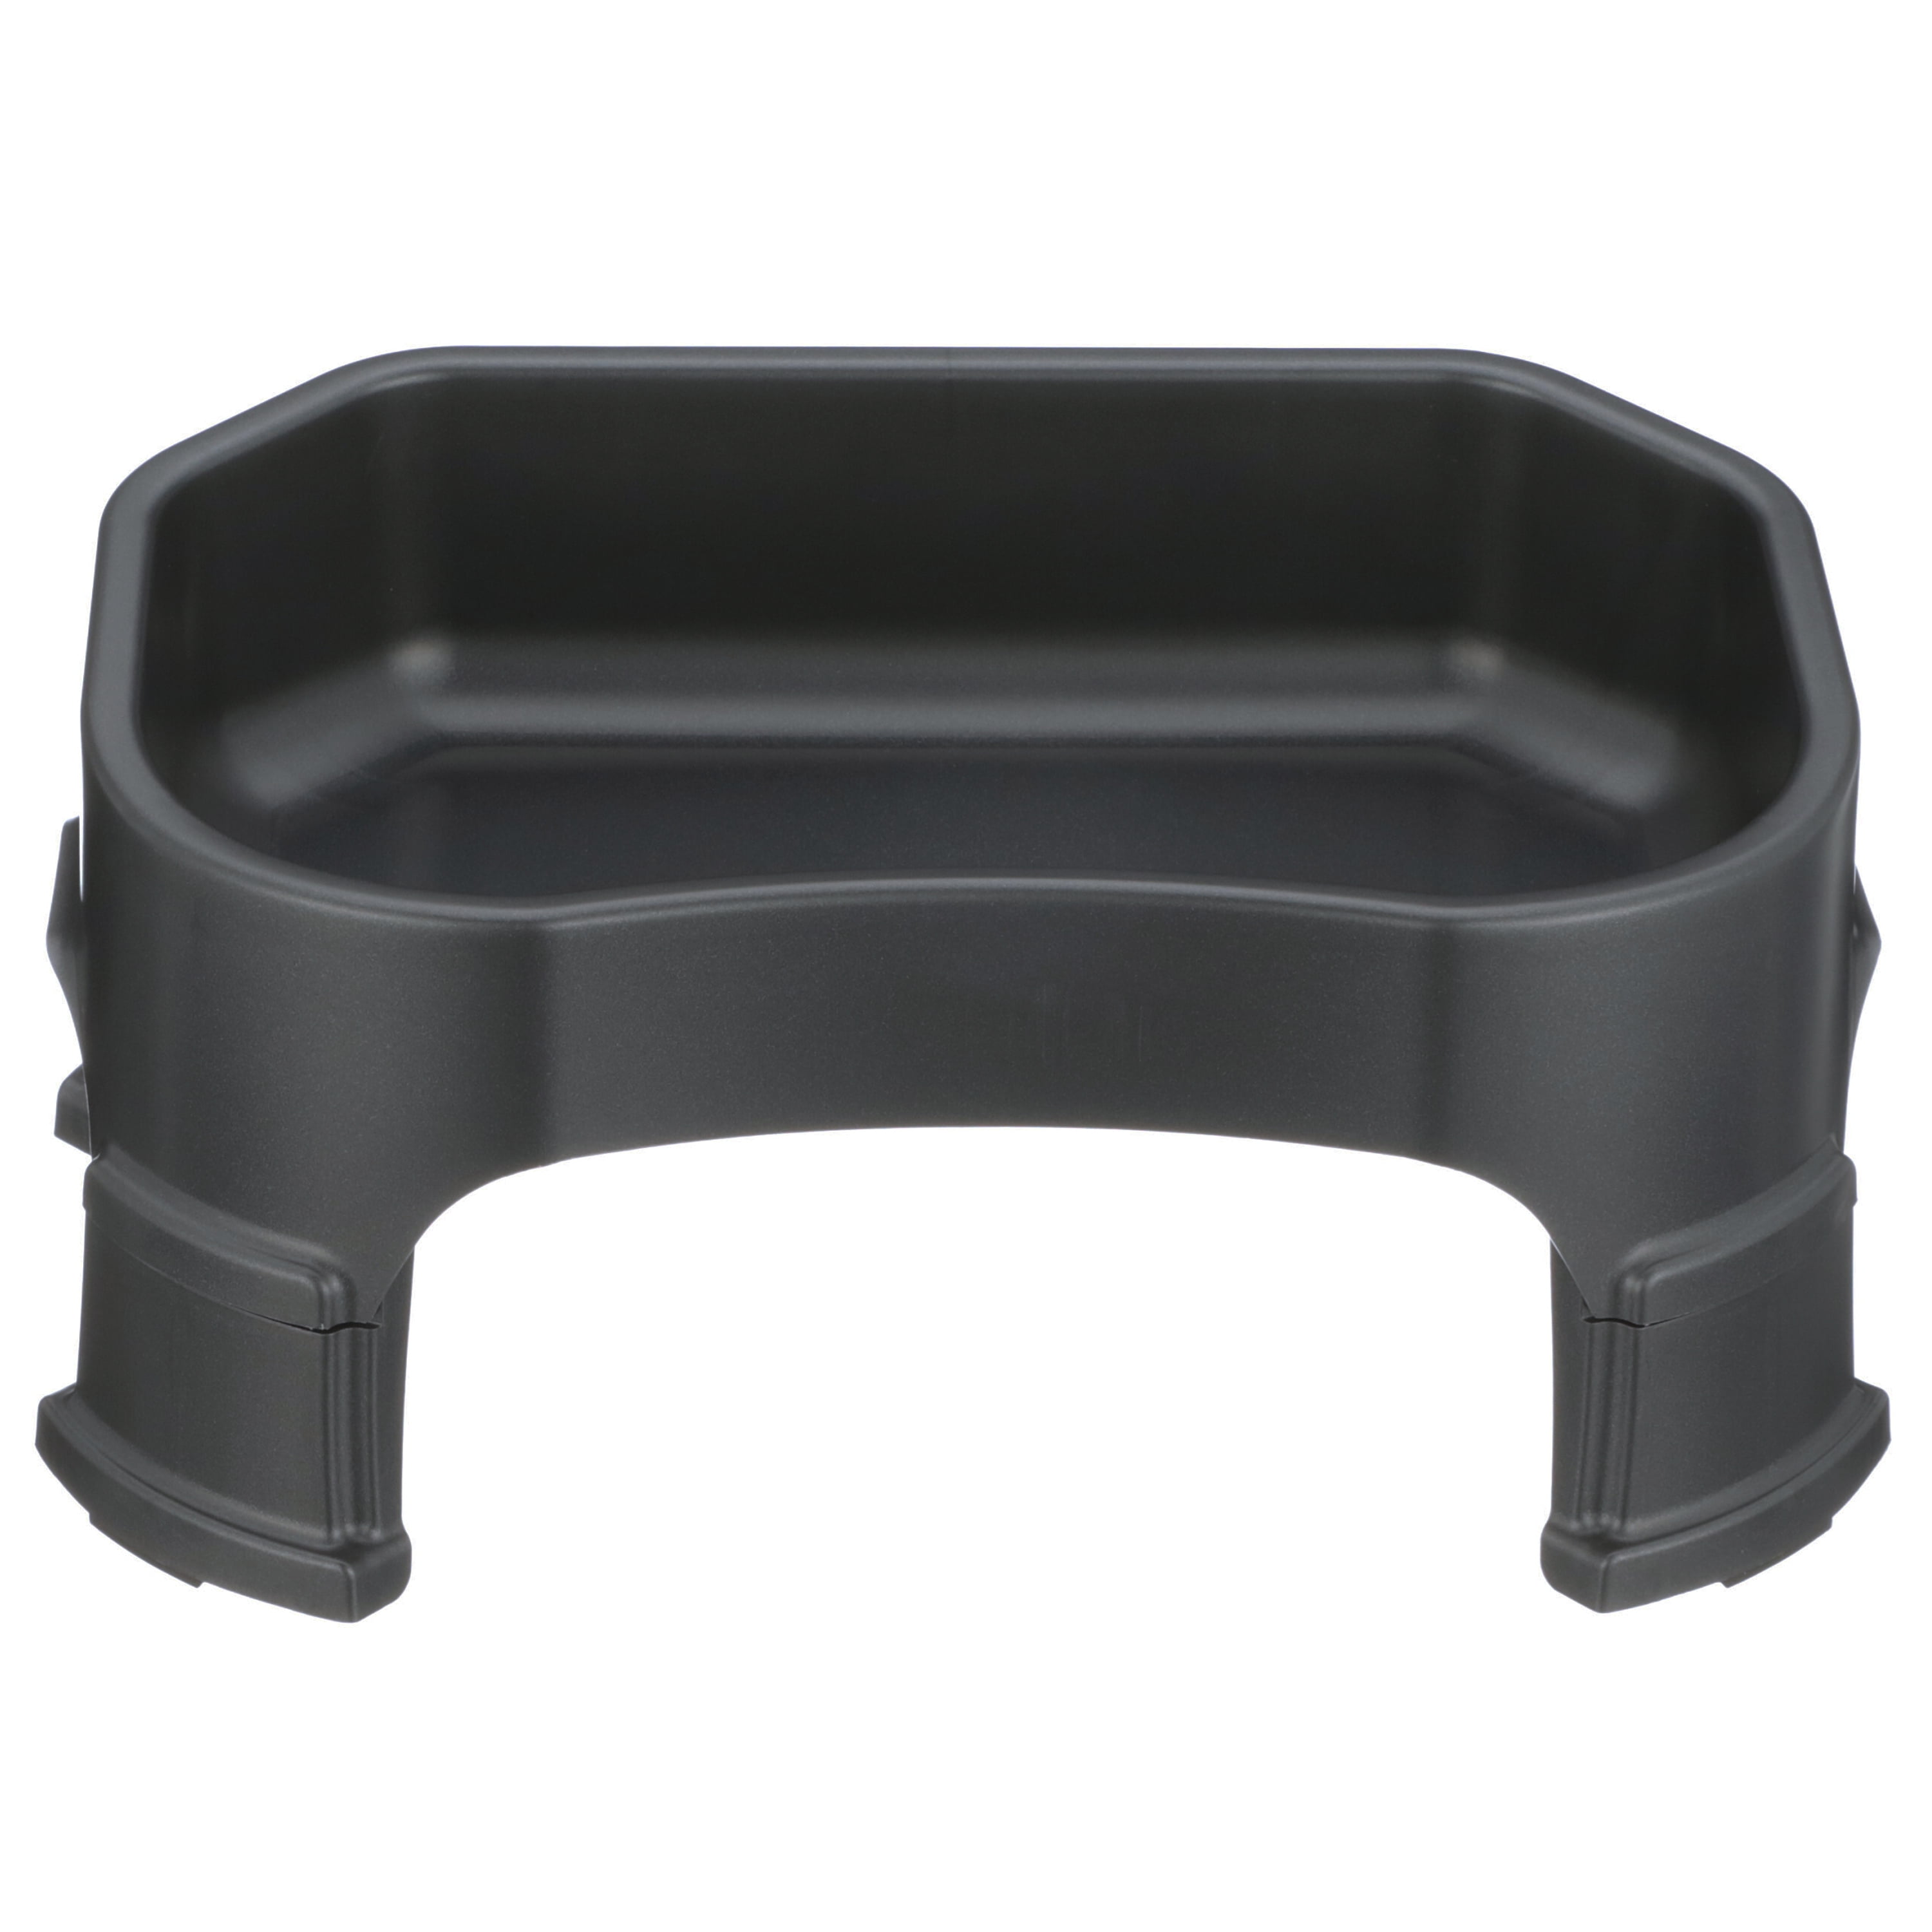 Neater Pets Little Big Bowl for Small Dogs - Plastic Trough Style